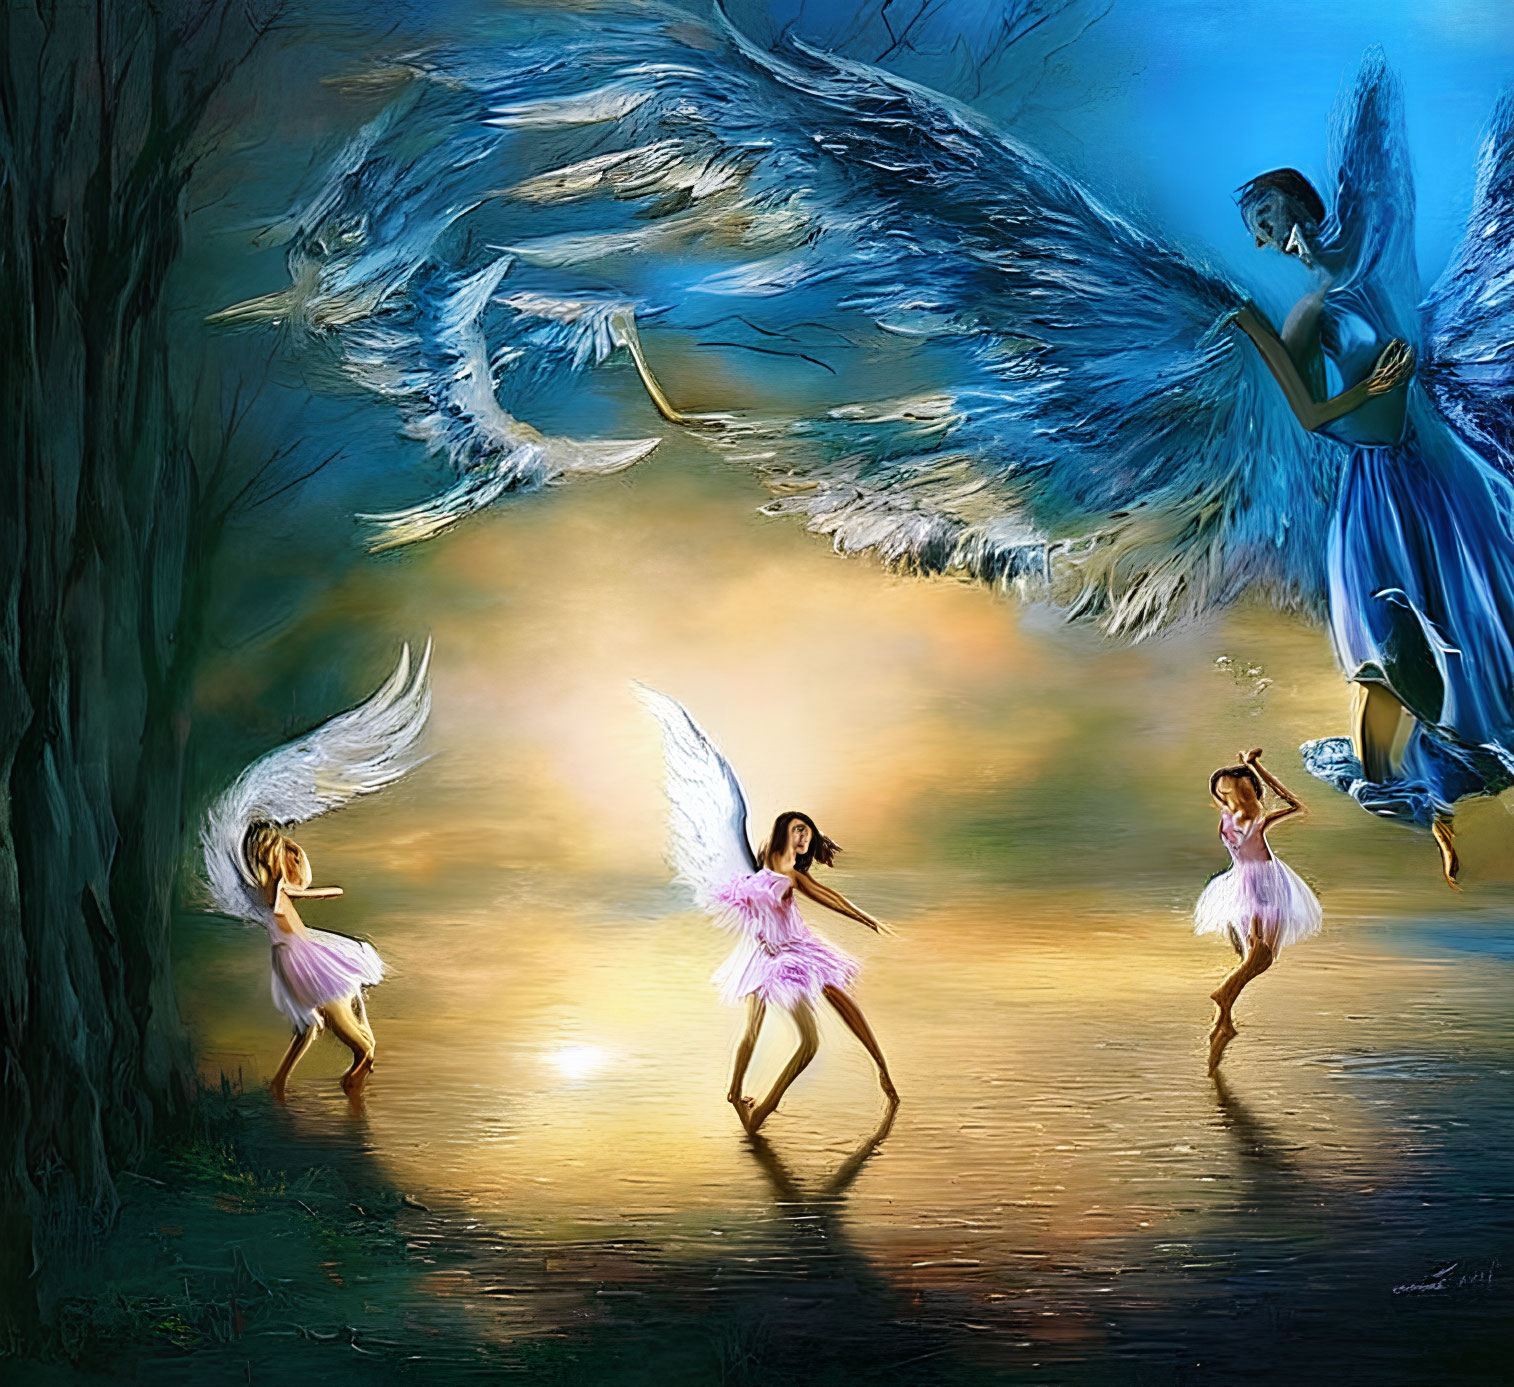 Ethereal beings in sunlit glade: large angel and four delicate dancers